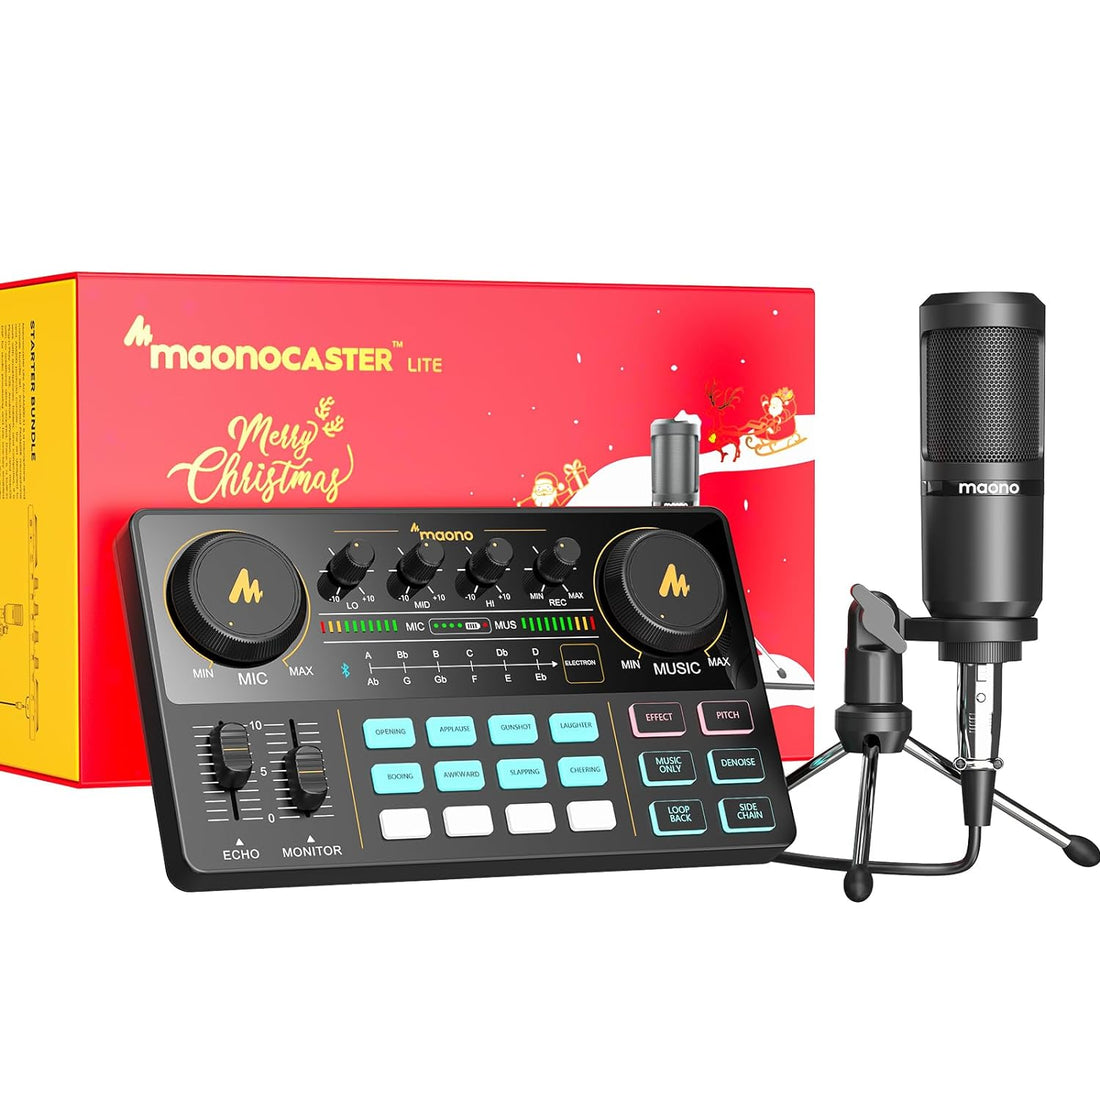 MAONO Podcast Equipment Bundle Audio Interface All-in-One Podcast Production Studio with 3.5mm Microphone for Live Streaming, Podcast Recording, PC, Smartphone MaonoCaster (S1 Christmas Gift Bundle)